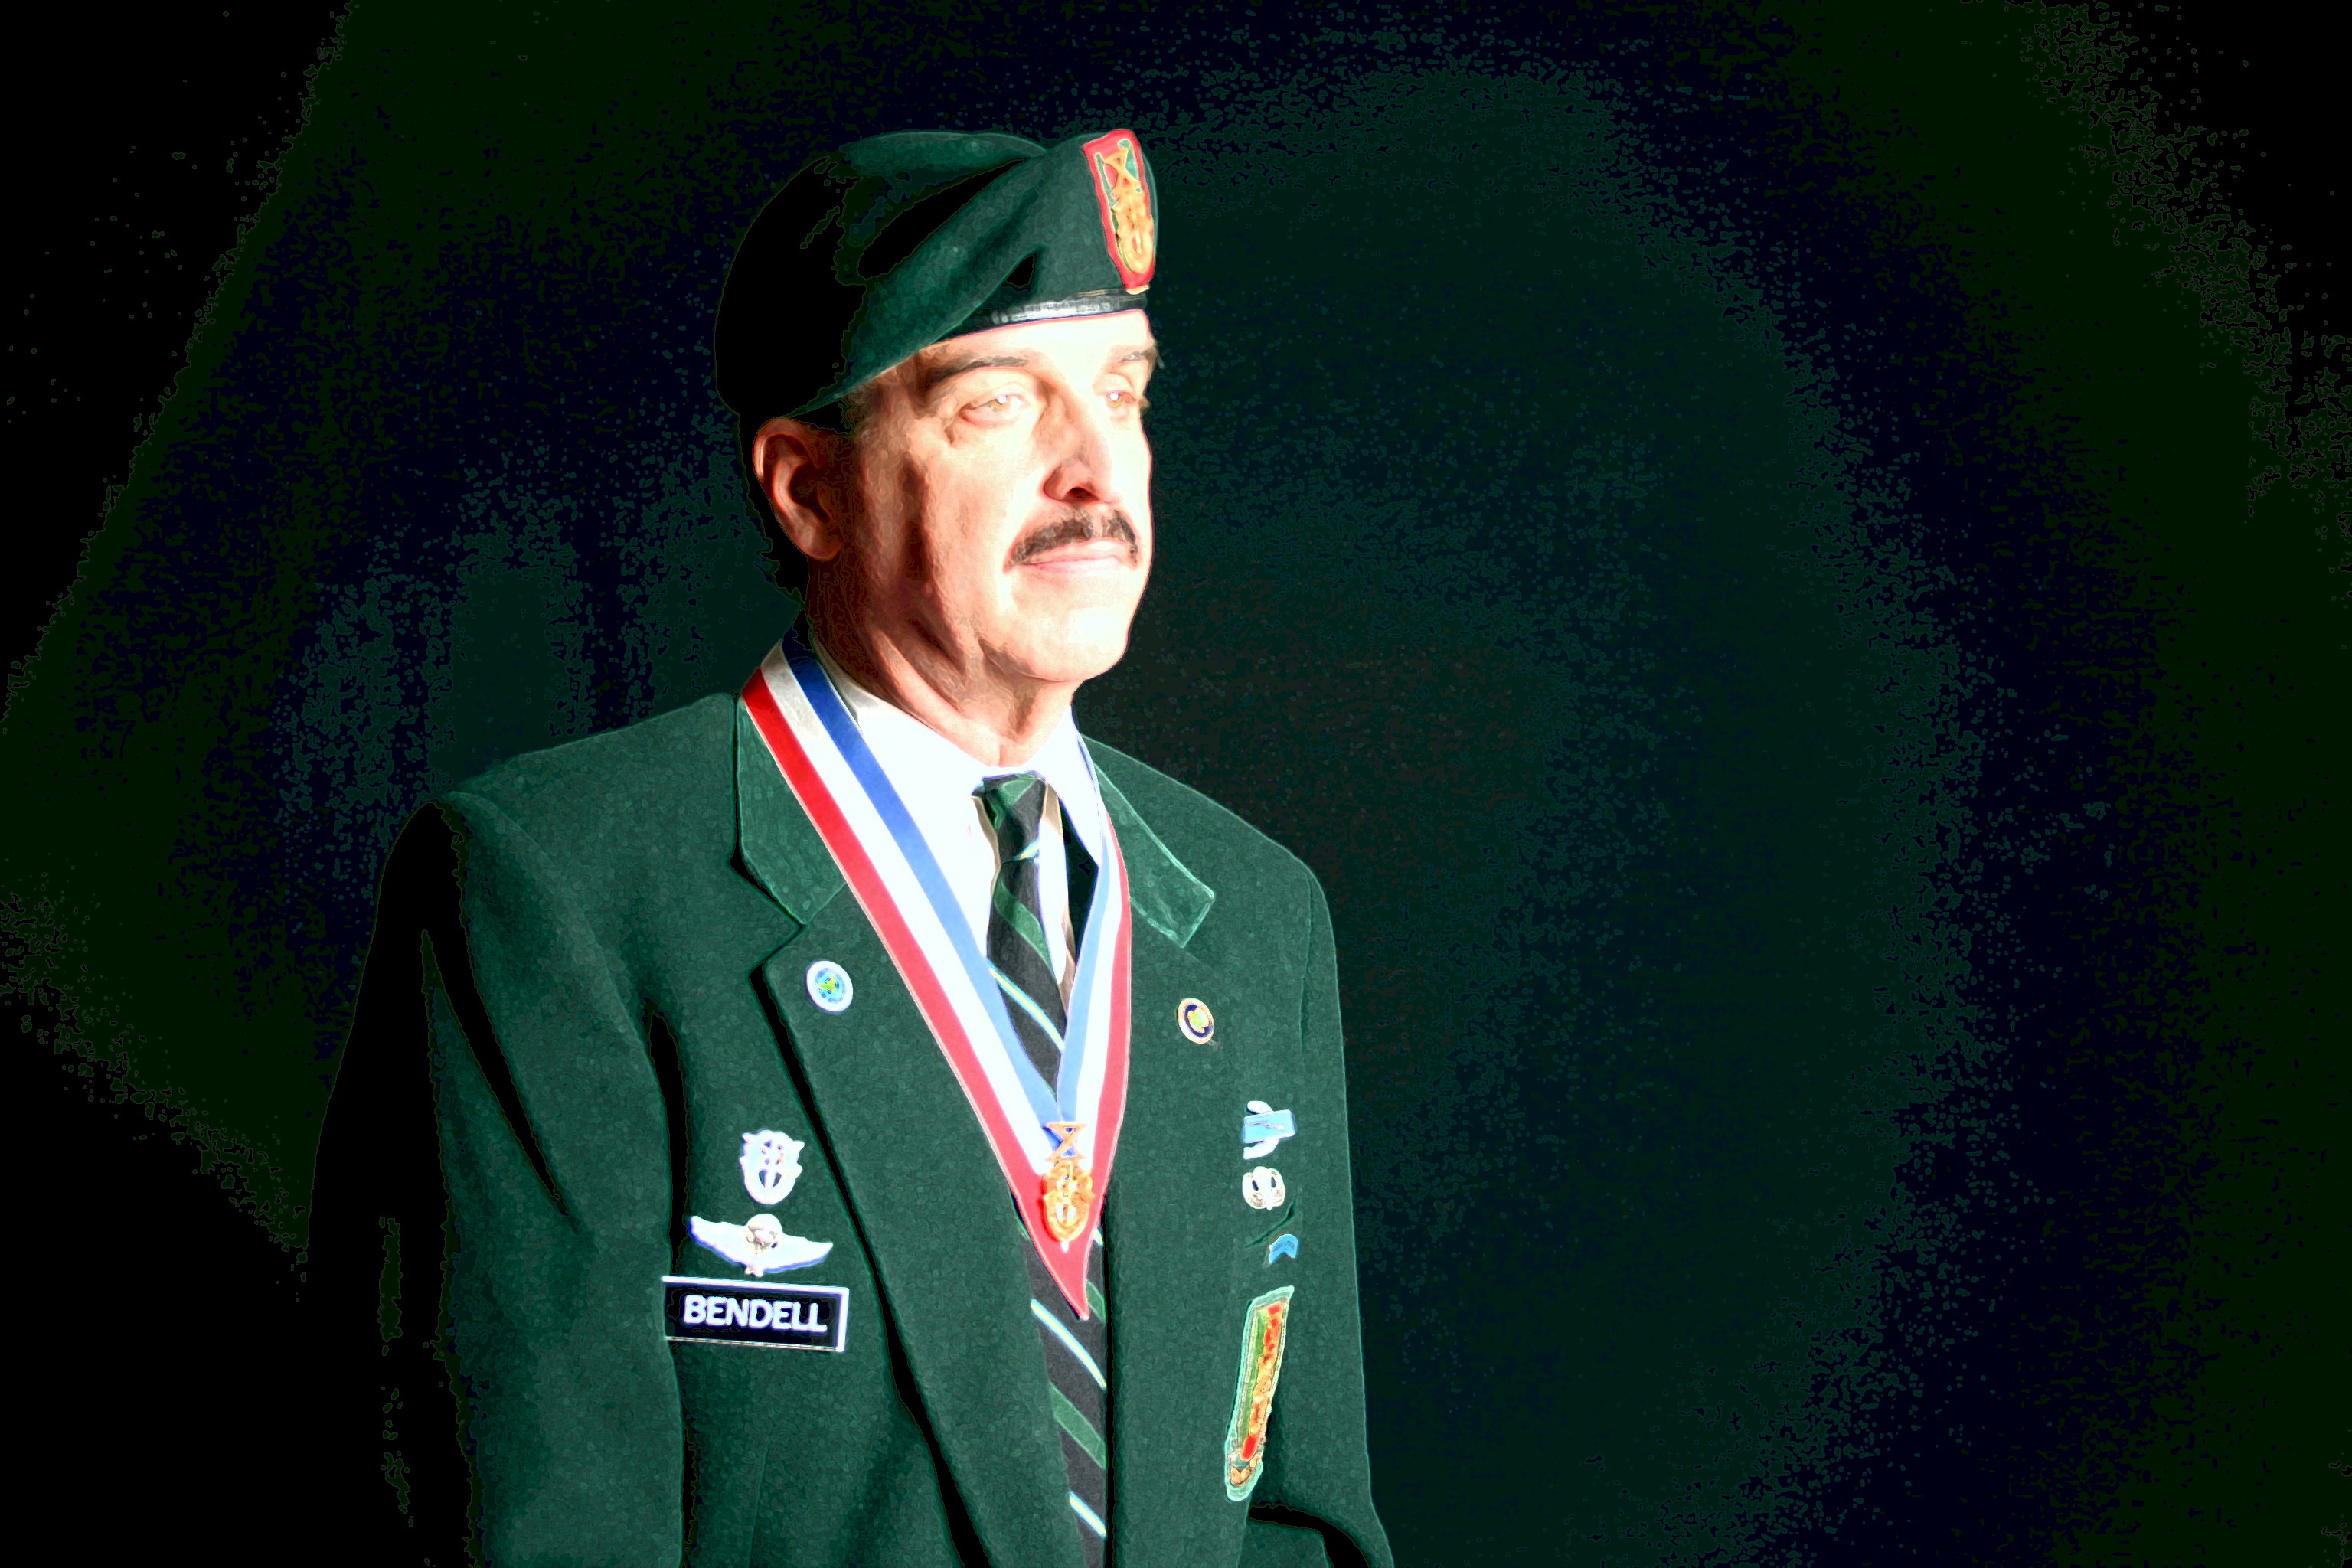 Don Bendell, Decade Life Member of Special Forces Association & Life member Special Operations Association.